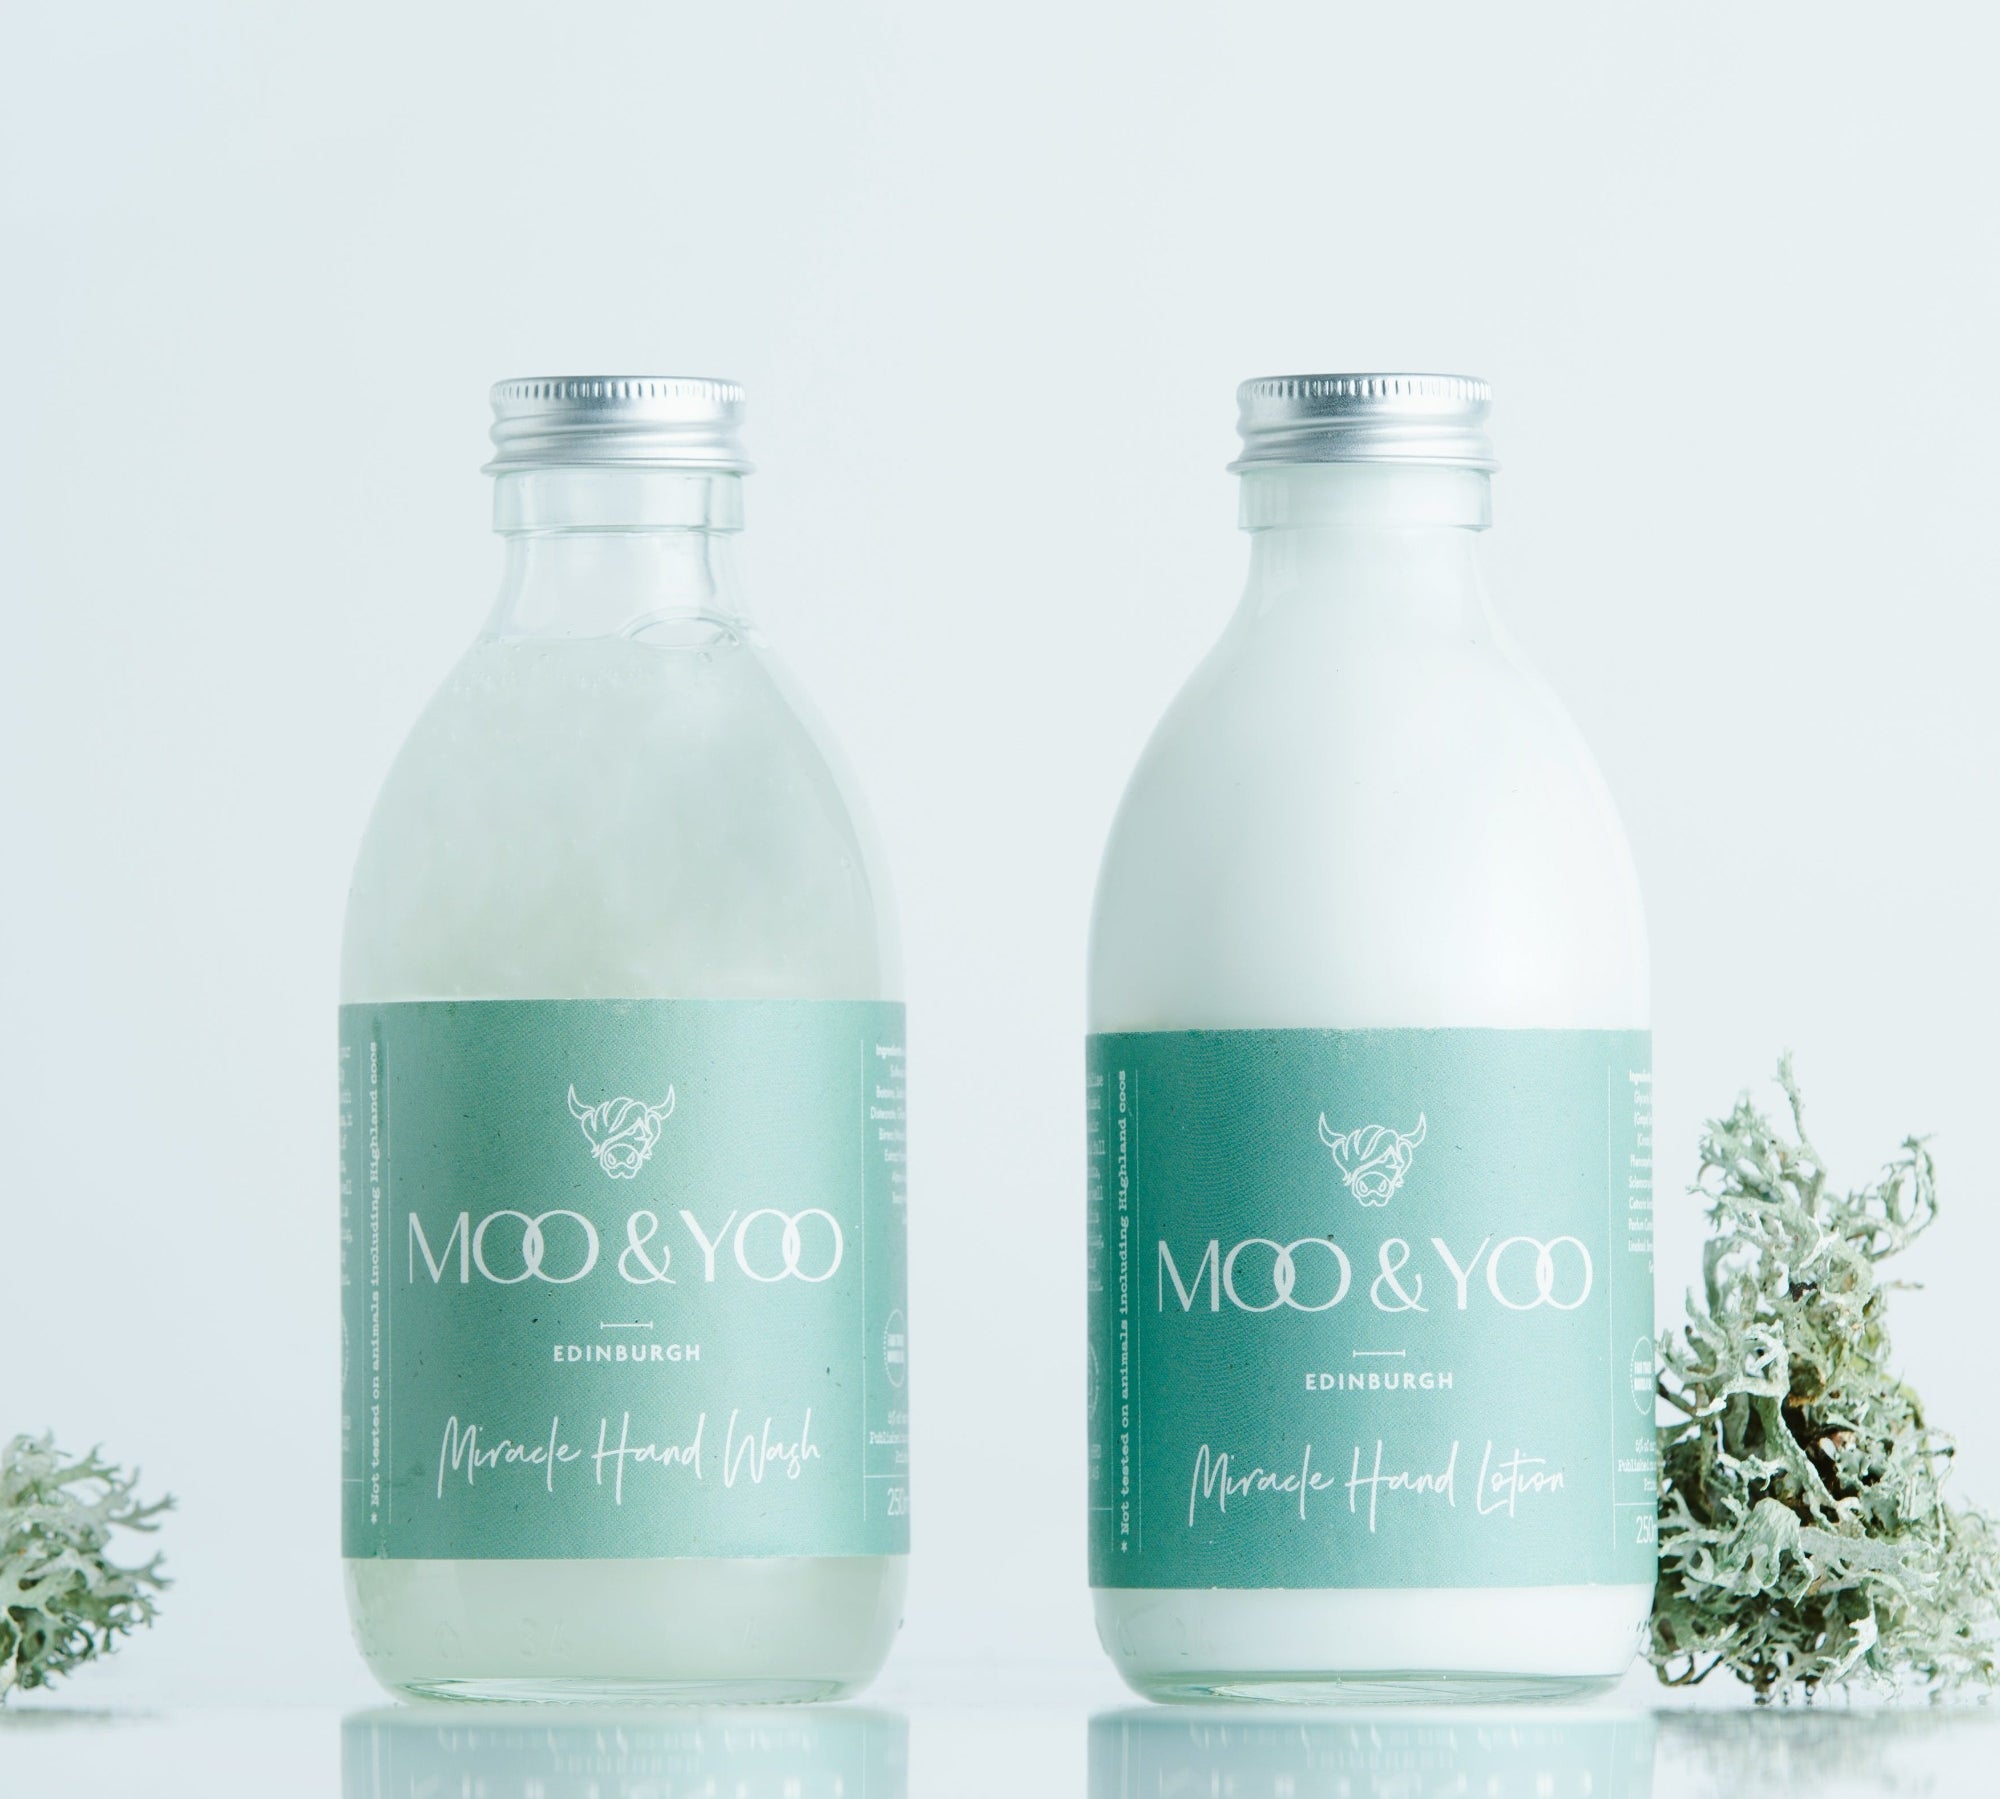 Two bottles of Miracle Hand Wash and Miracle Hand Lotion sitting side by side on a white background with a sprig of moss on each side.